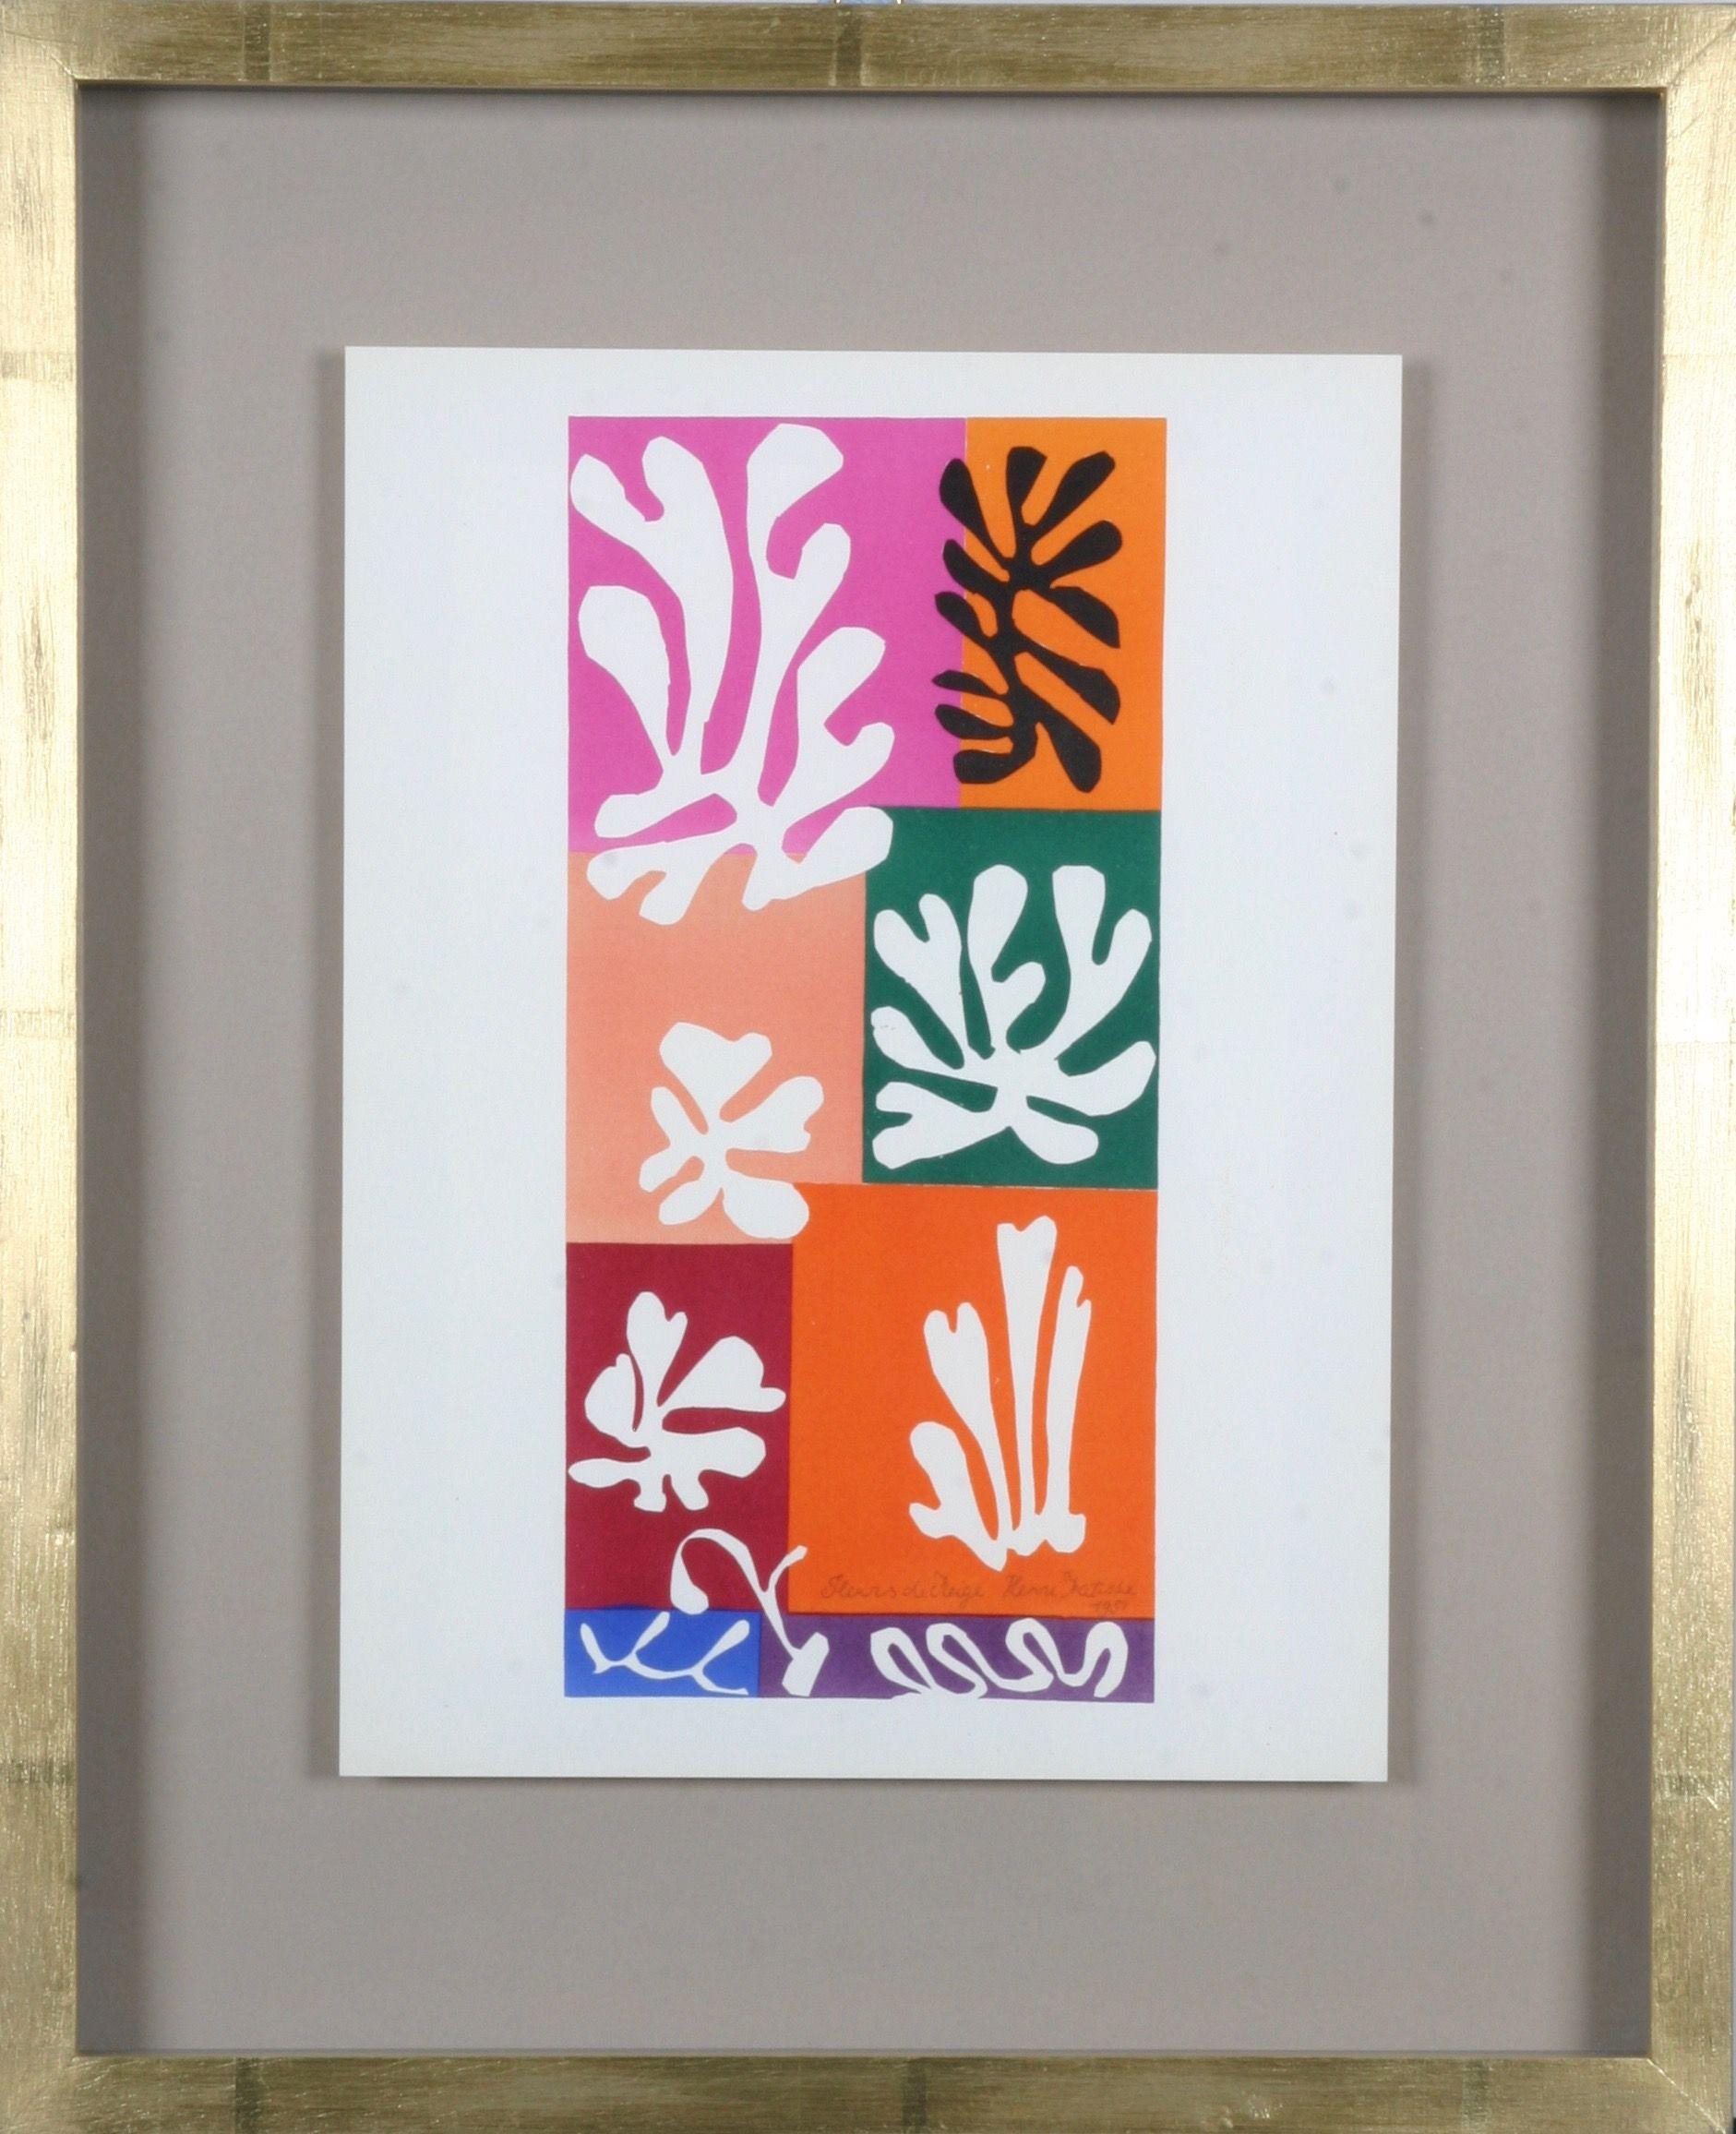 Henri Matisse - Henri Matisse: Colour Lithographs after the Cut-Outs,  Framed Print, 1958 For Sale at 1stDibs